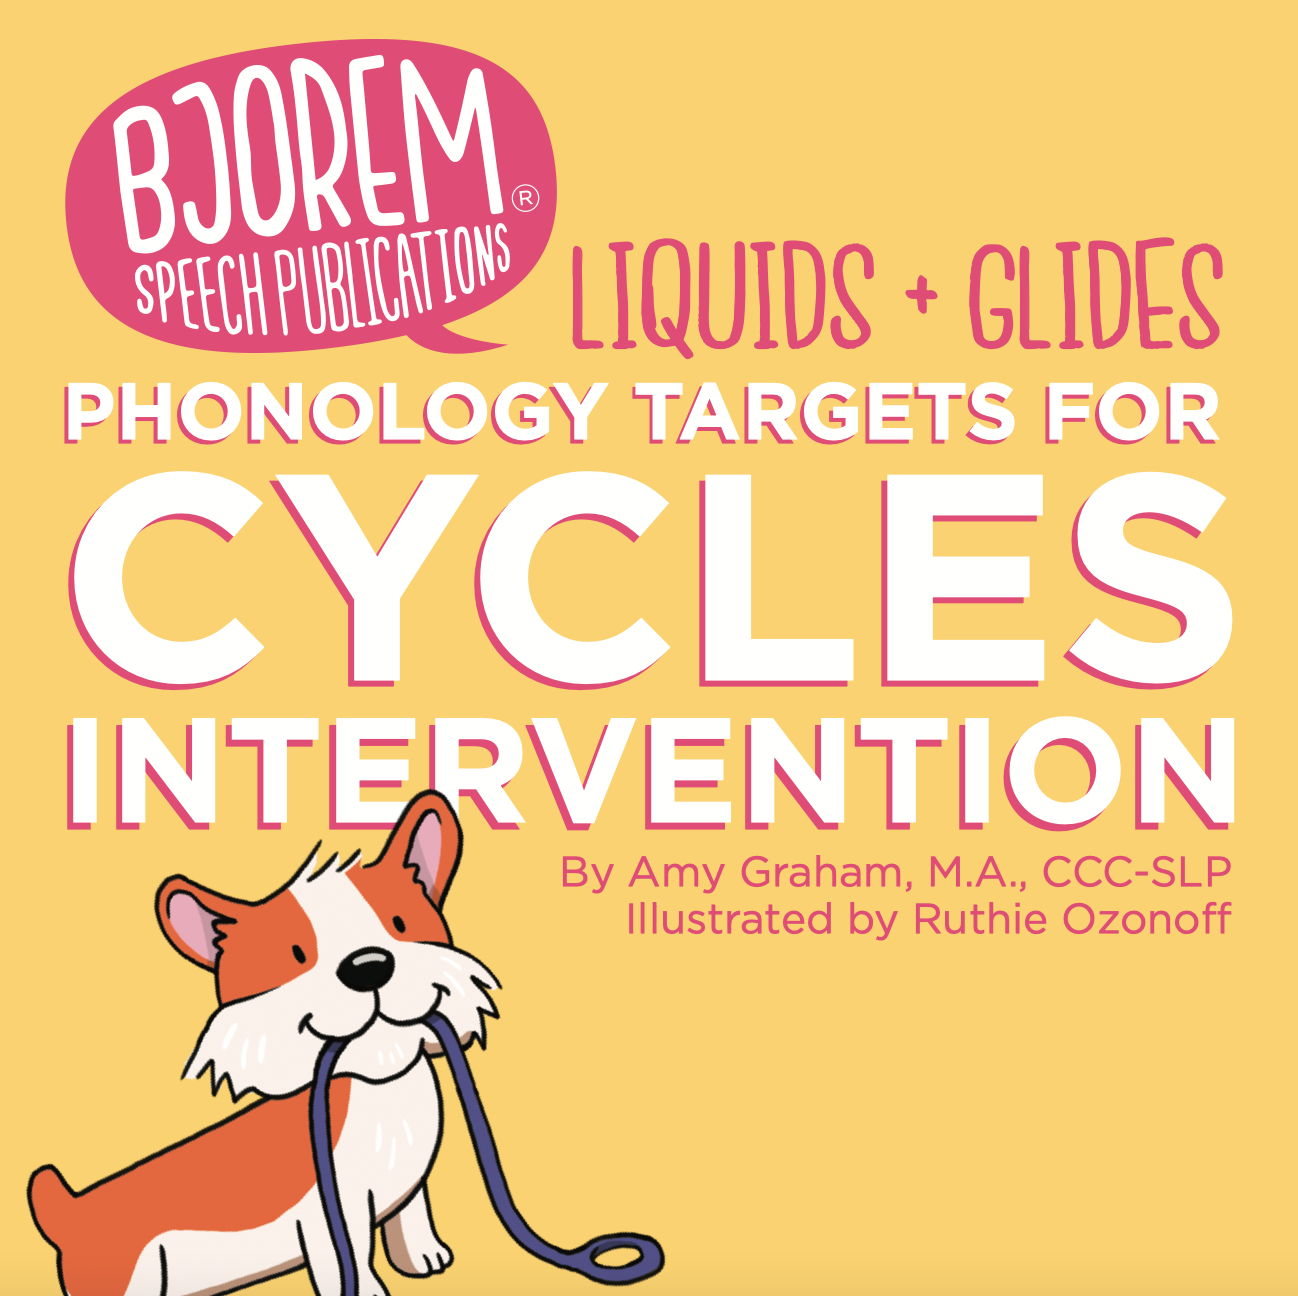 [title]Cycles Intervention: Liquids & Glides Phonology Targets